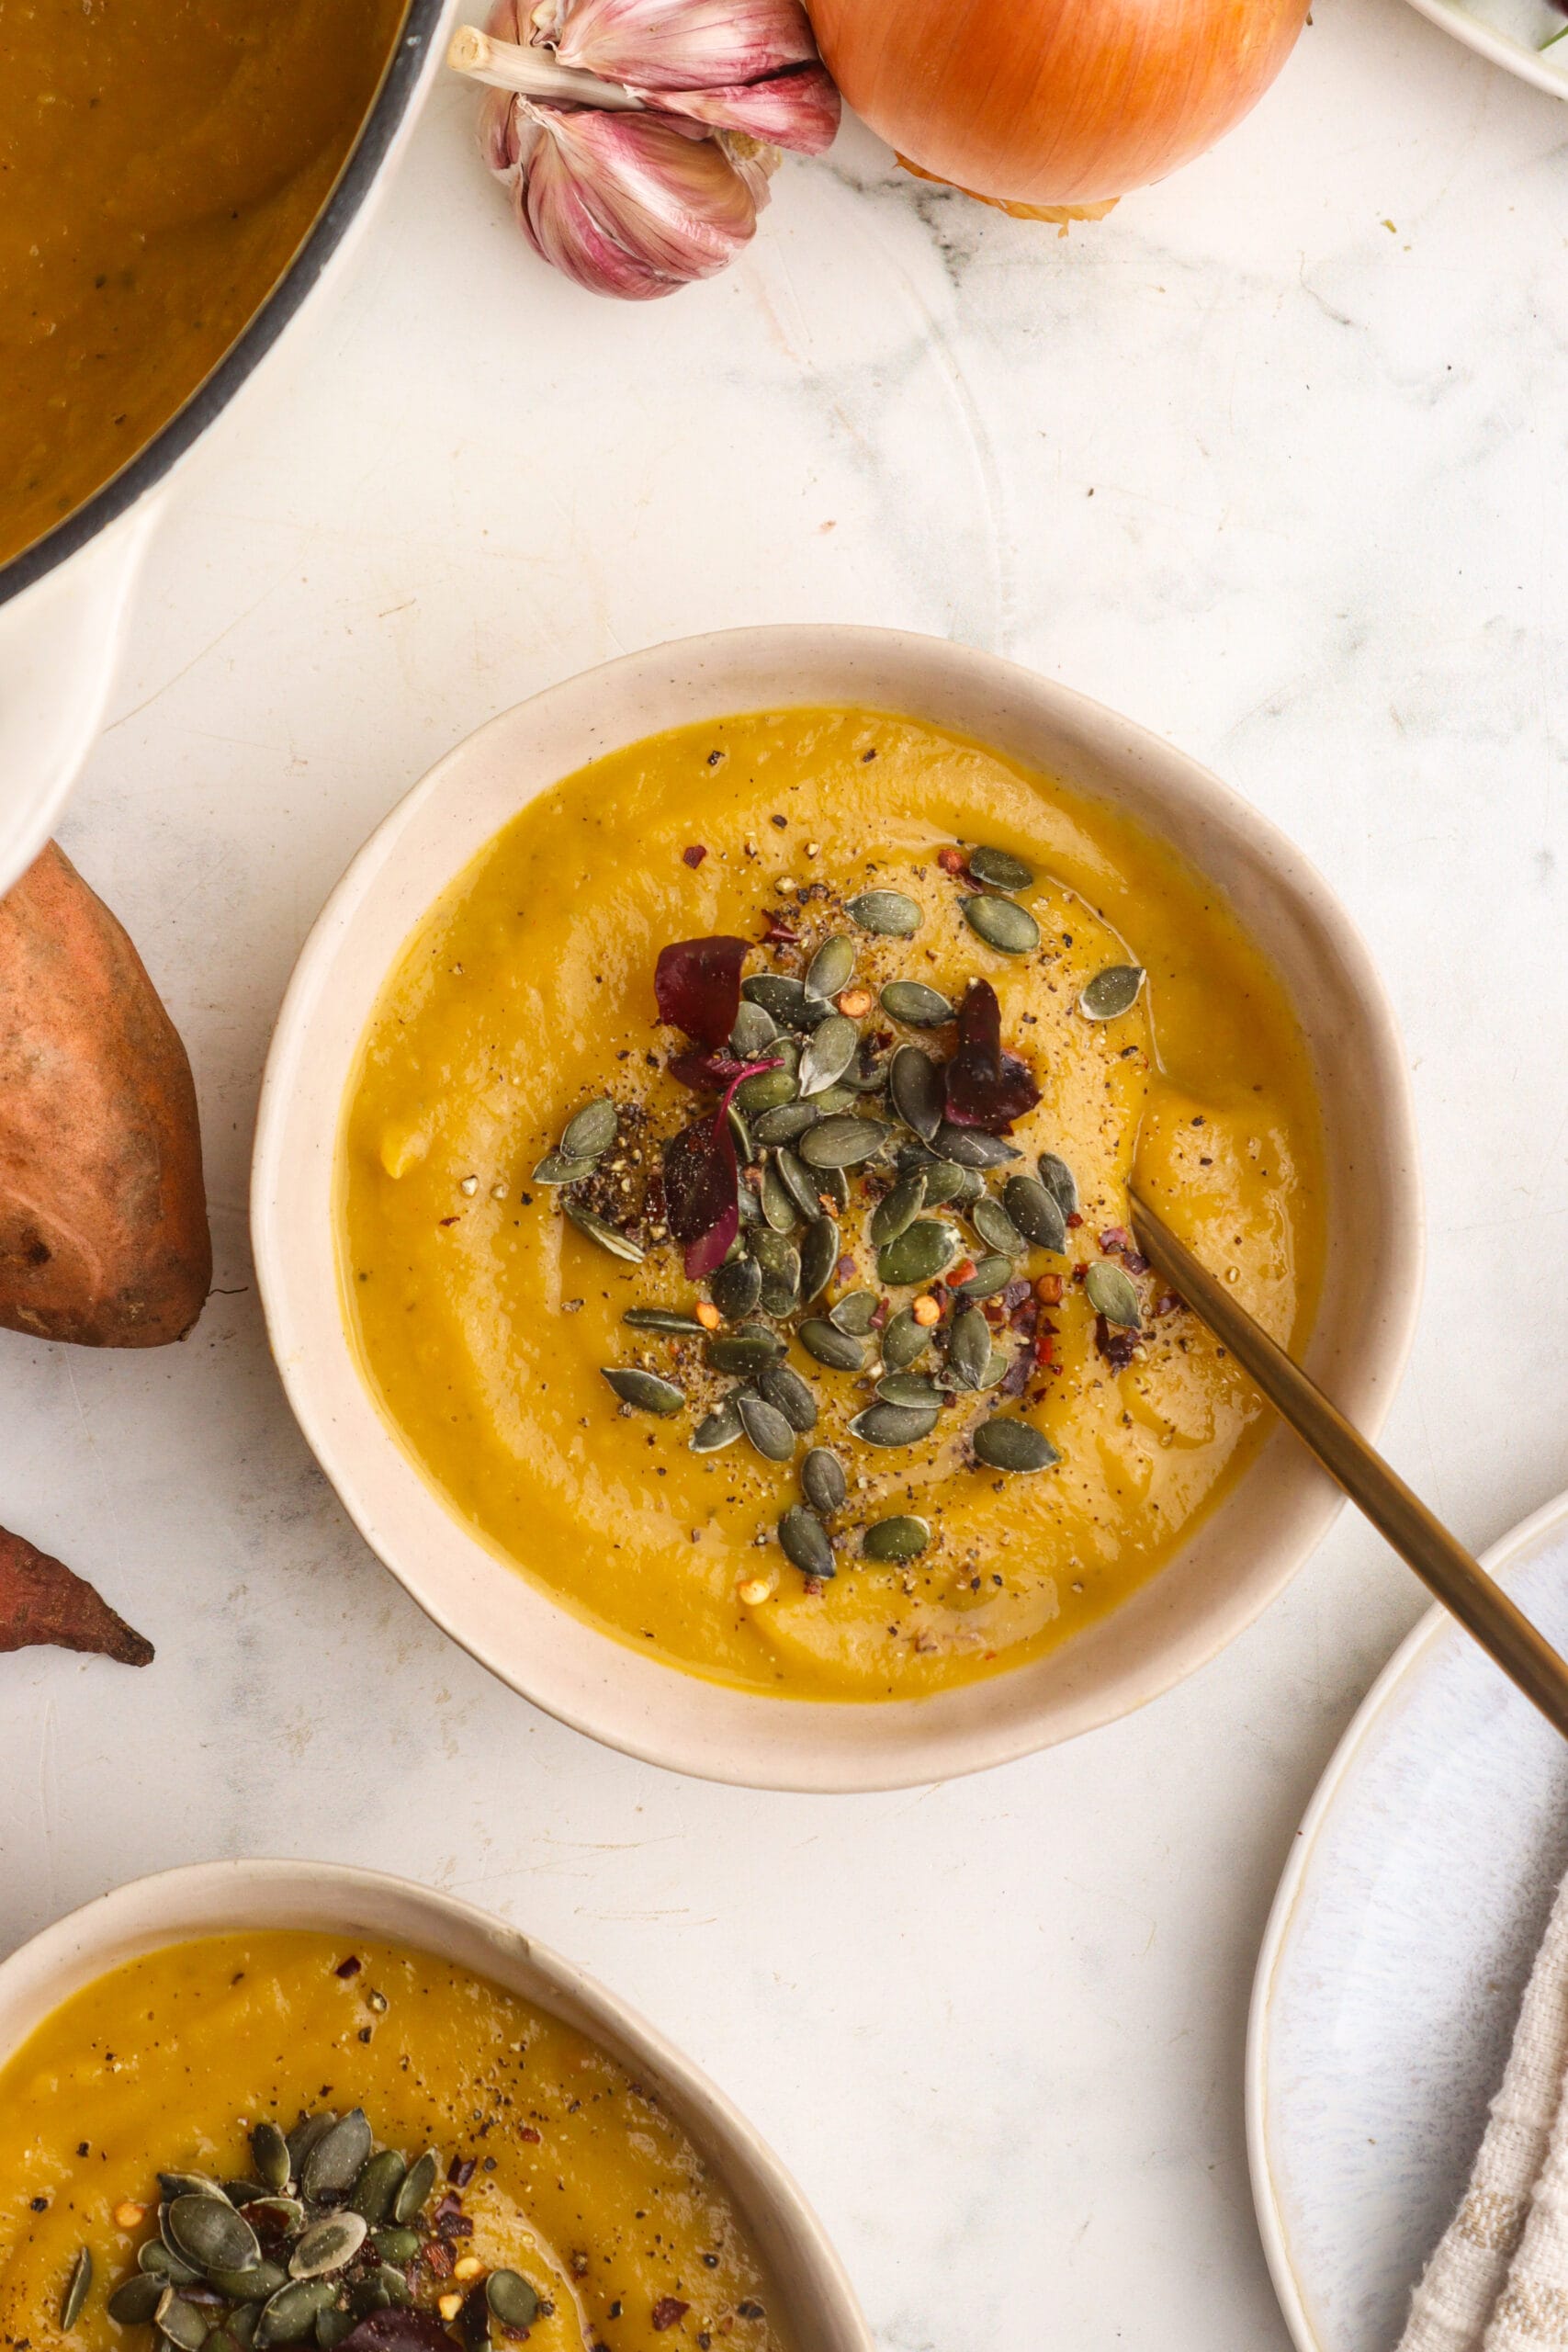 Sweet potato soup picture above